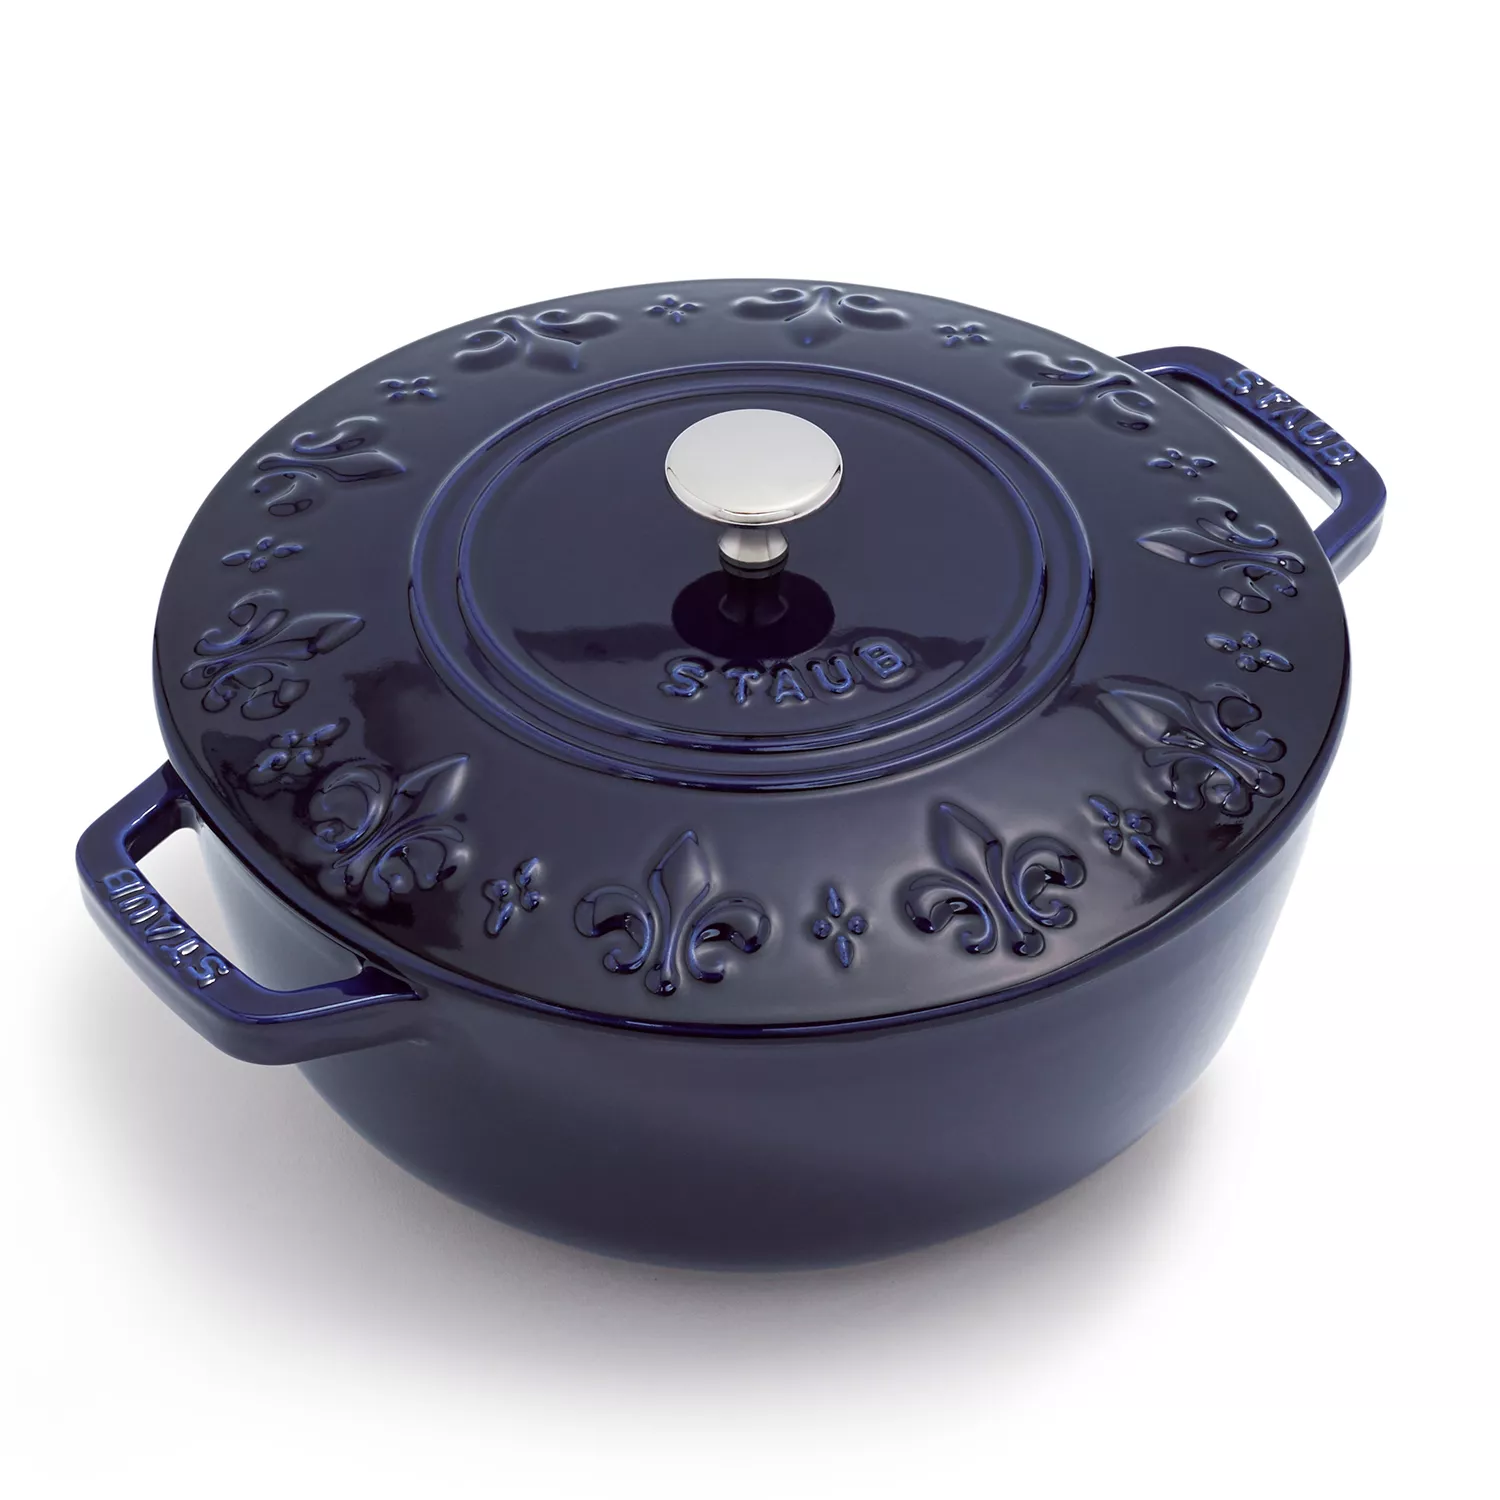 There's A Ton Of Staub Cookware On Sale At Sur La Table